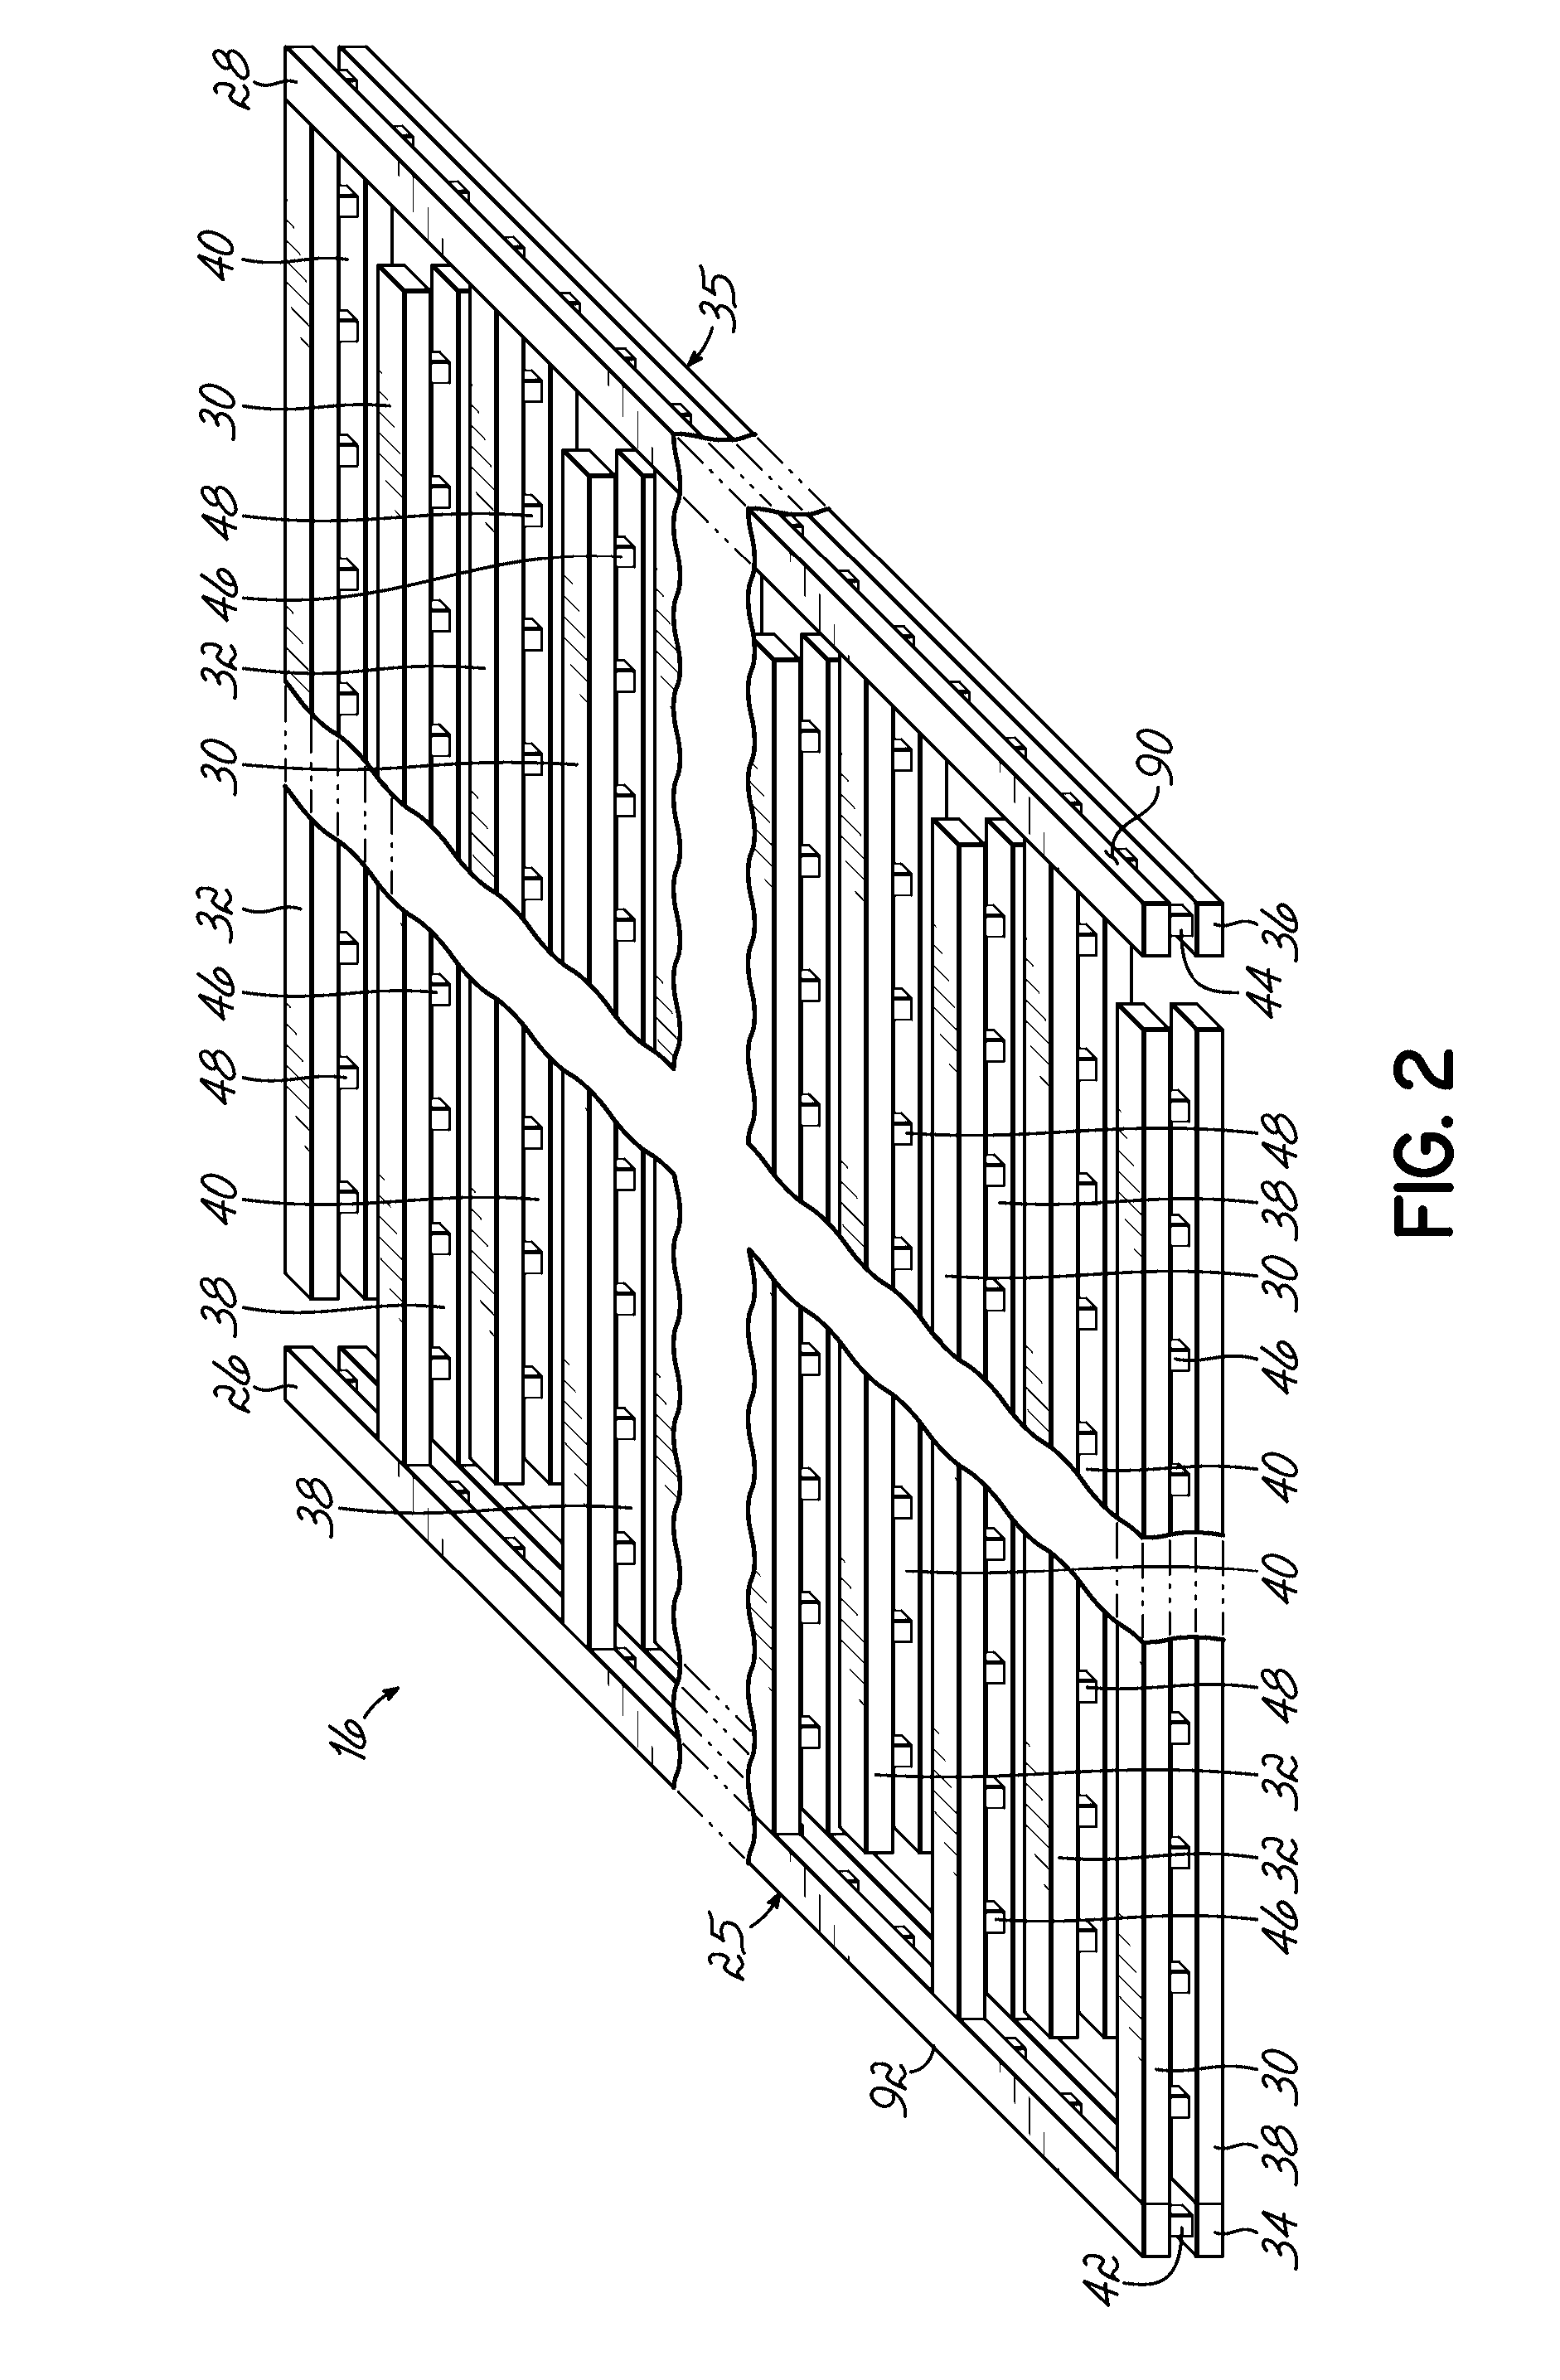 BEOL Wiring Structures That Include an On-Chip Inductor and an On-Chip Capacitor, and Design Structures for a Radiofrequency Integrated Circuit